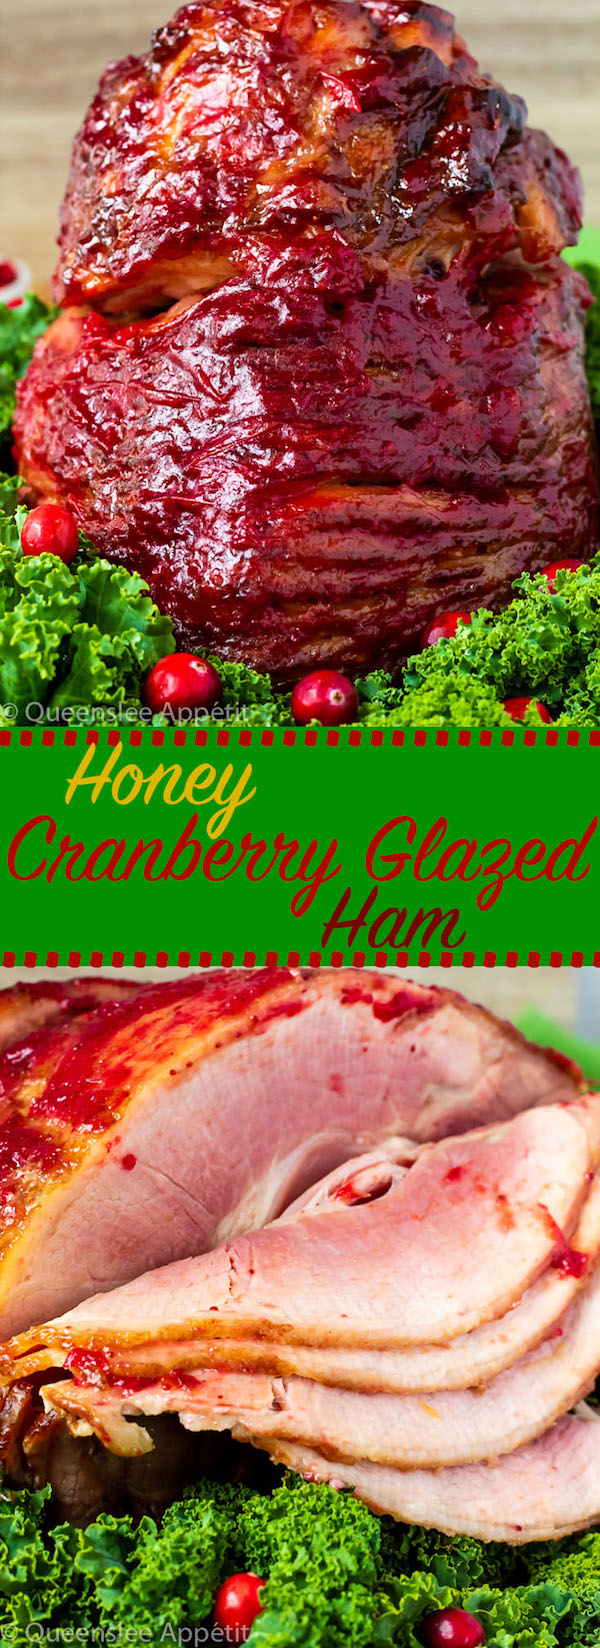 This Honey Cranberry Glazed Ham is super juicy! Coated in a sweet and tangy glaze made with honey, fresh cranberries and more spices and flavours that add an extra zing — this is the perfect centrepiece for your Christmas dinner table!   